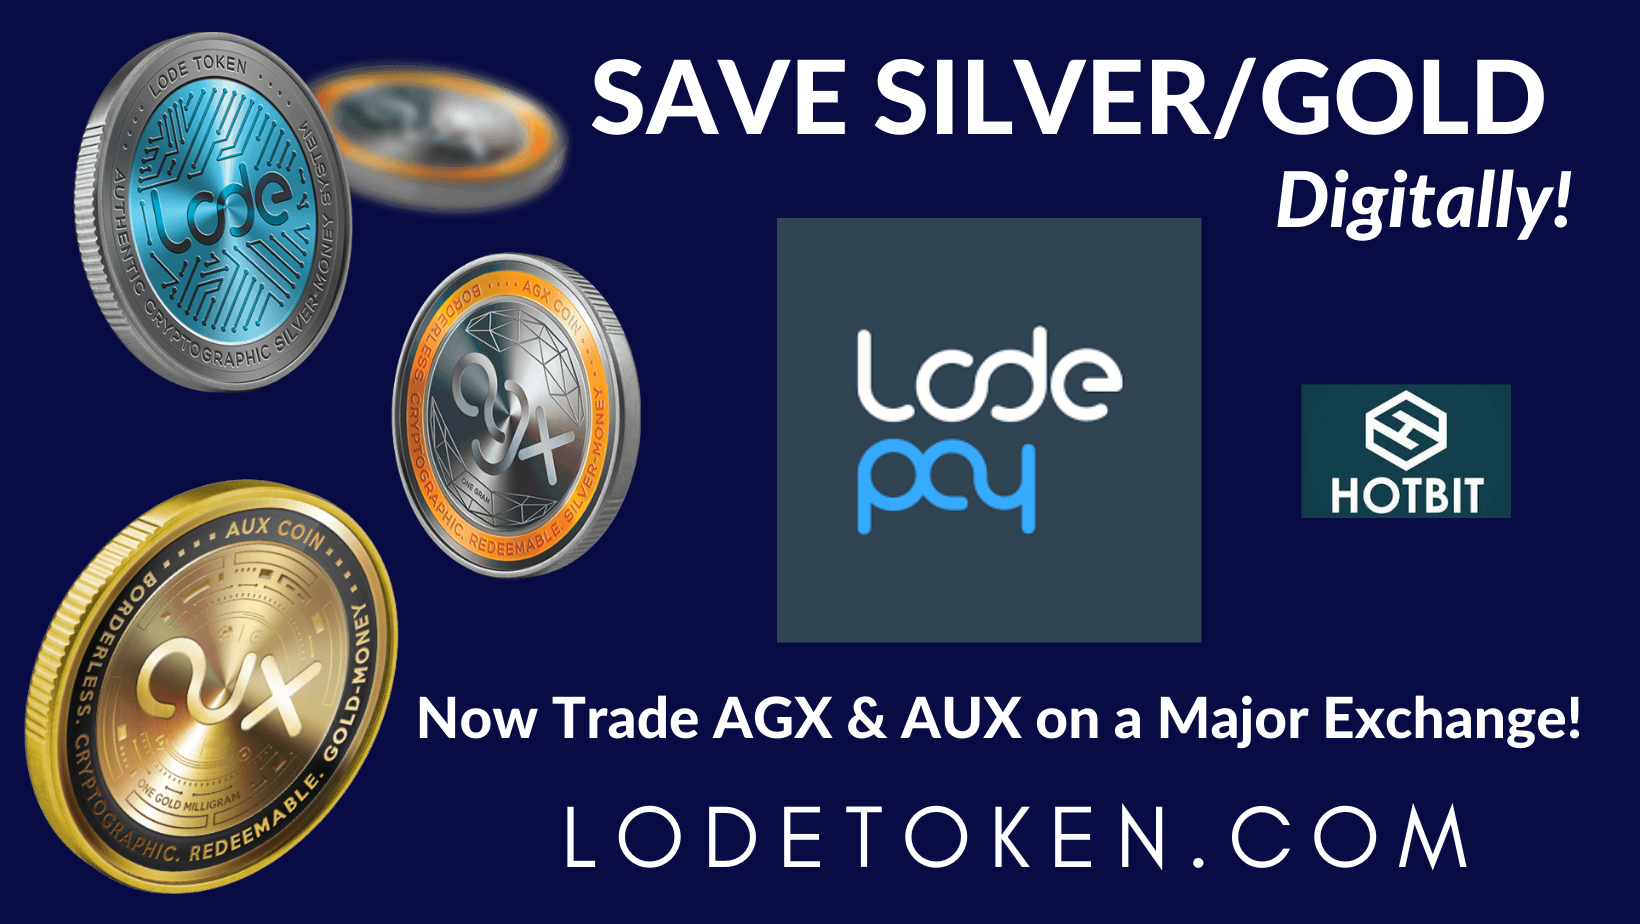 LODE ..SAVE GOLD SILVER DIGITALLY 2.0 - Bolts Can't Stop Vikings as Chargers Lose 3 of Last 4